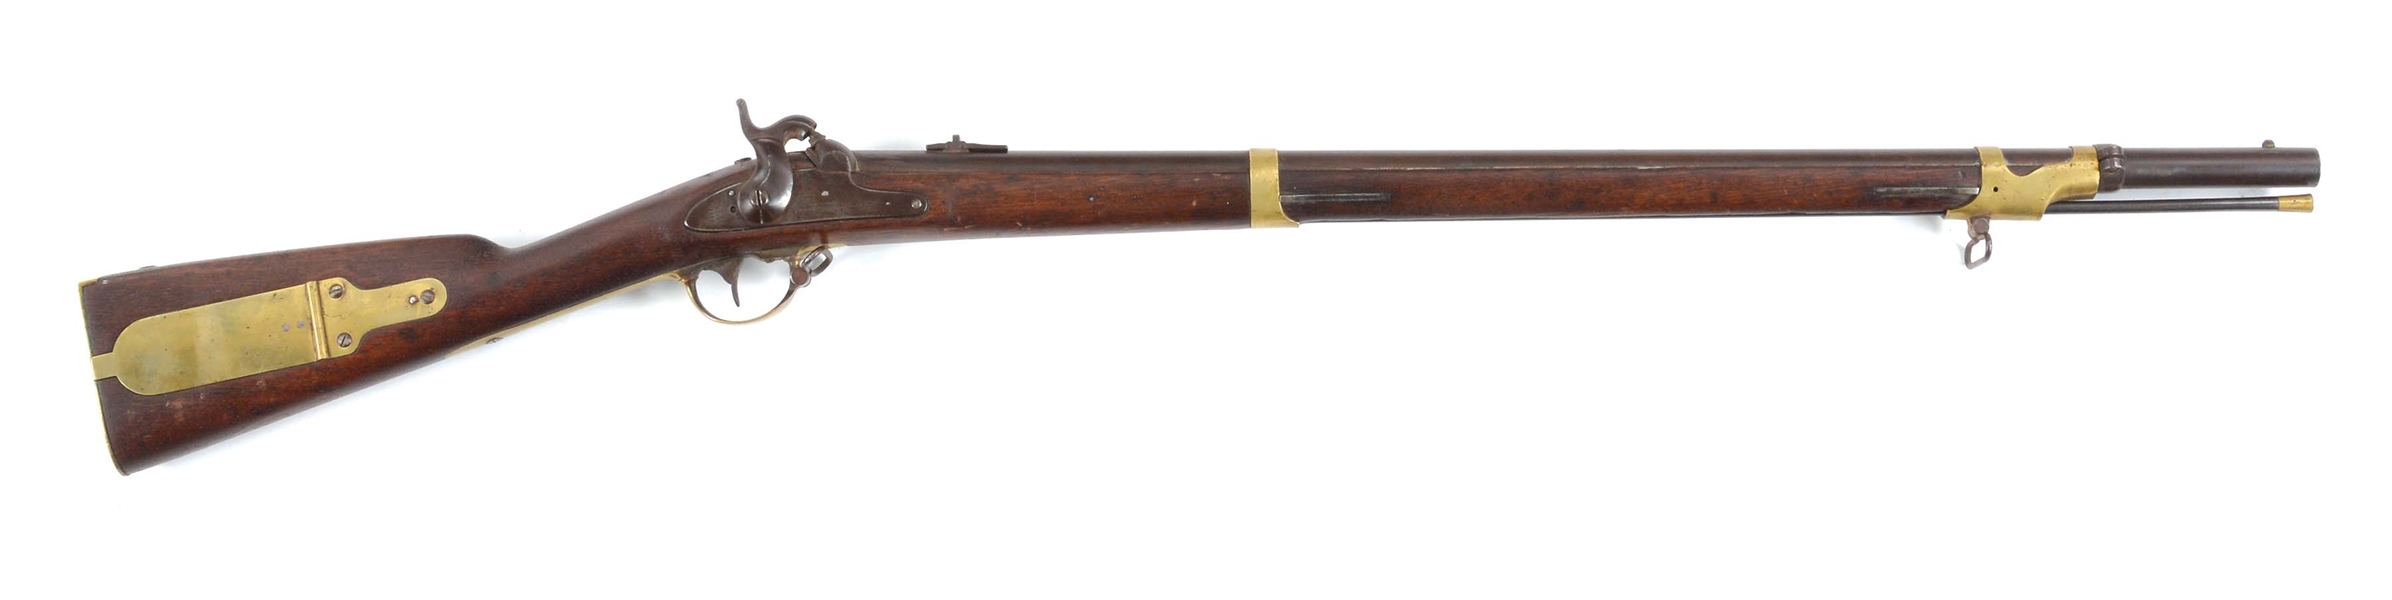 (A) ELI WHITNEY .58 CALIBER N. HAVEN 1841 STYLE PERCUSSION RIFLE.